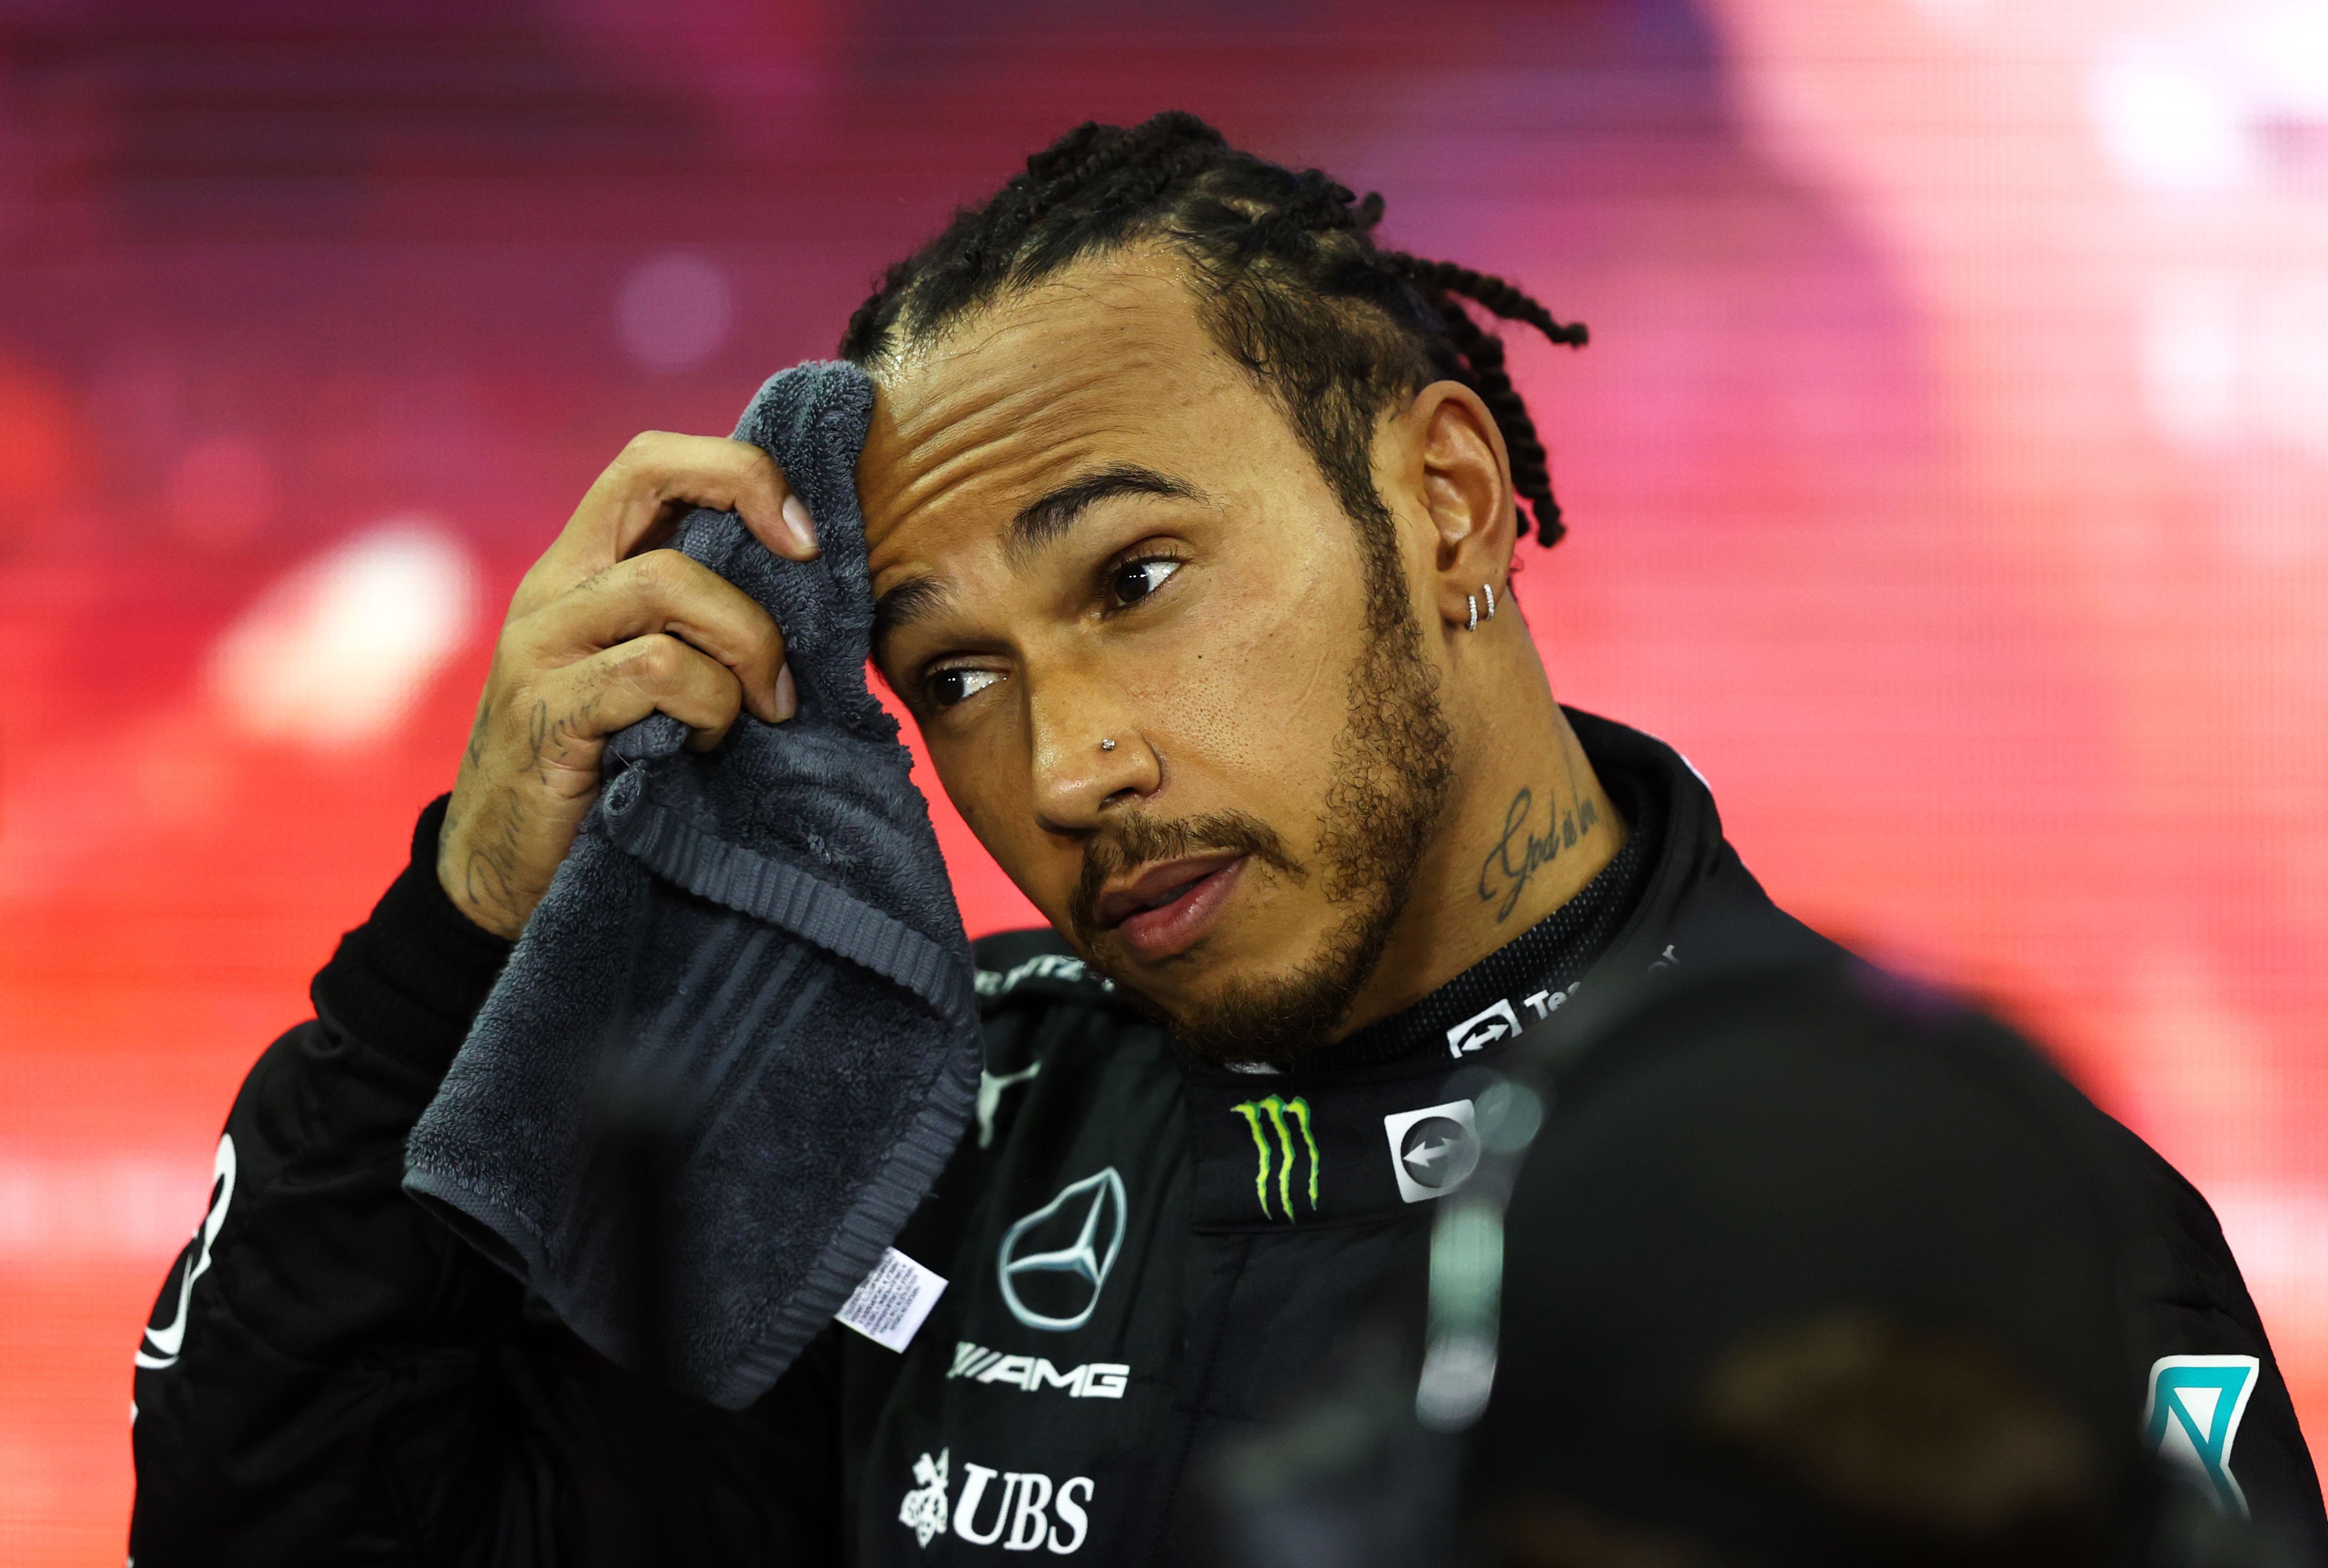 Lewis Hamilton admits he 'lost faith' in F1 after Abu Dhabi finale